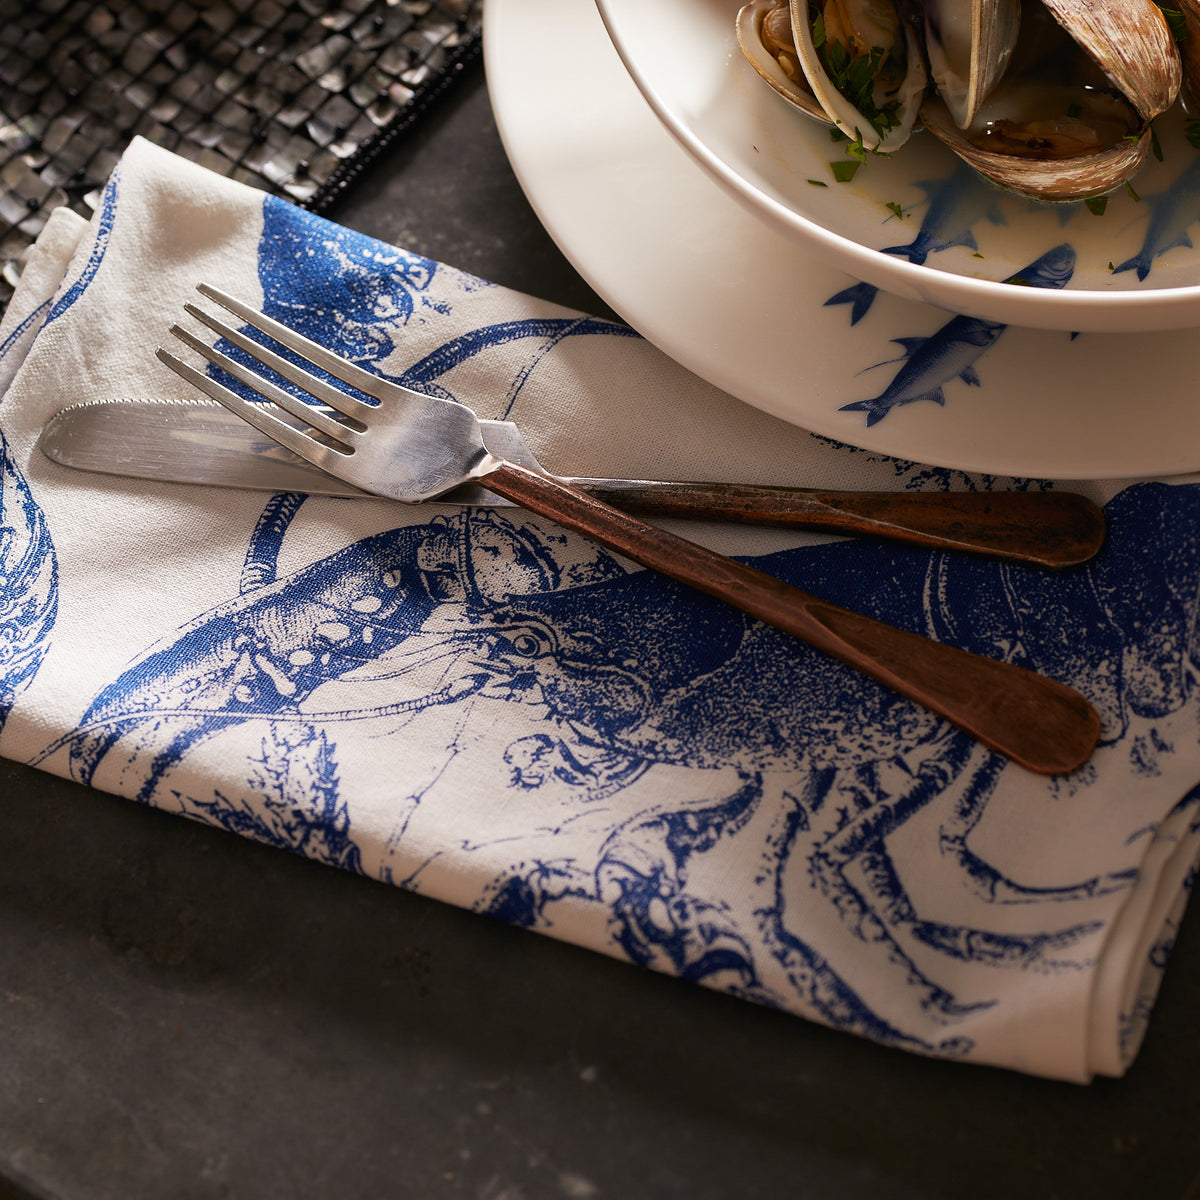 A fork and knife rest on a patterned napkin alongside a bowl of clams, perfectly suited for any Caskata Lobster Boil Bundle set.